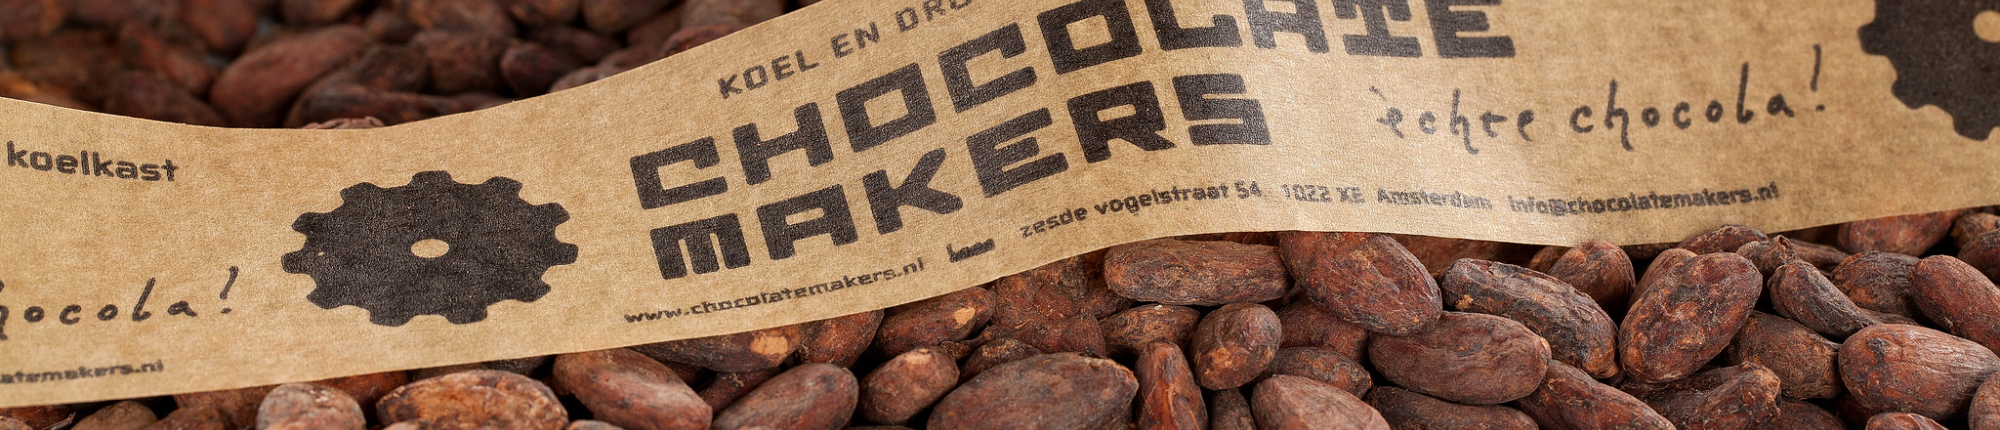 Meet the Chocolate Makers + drinks!